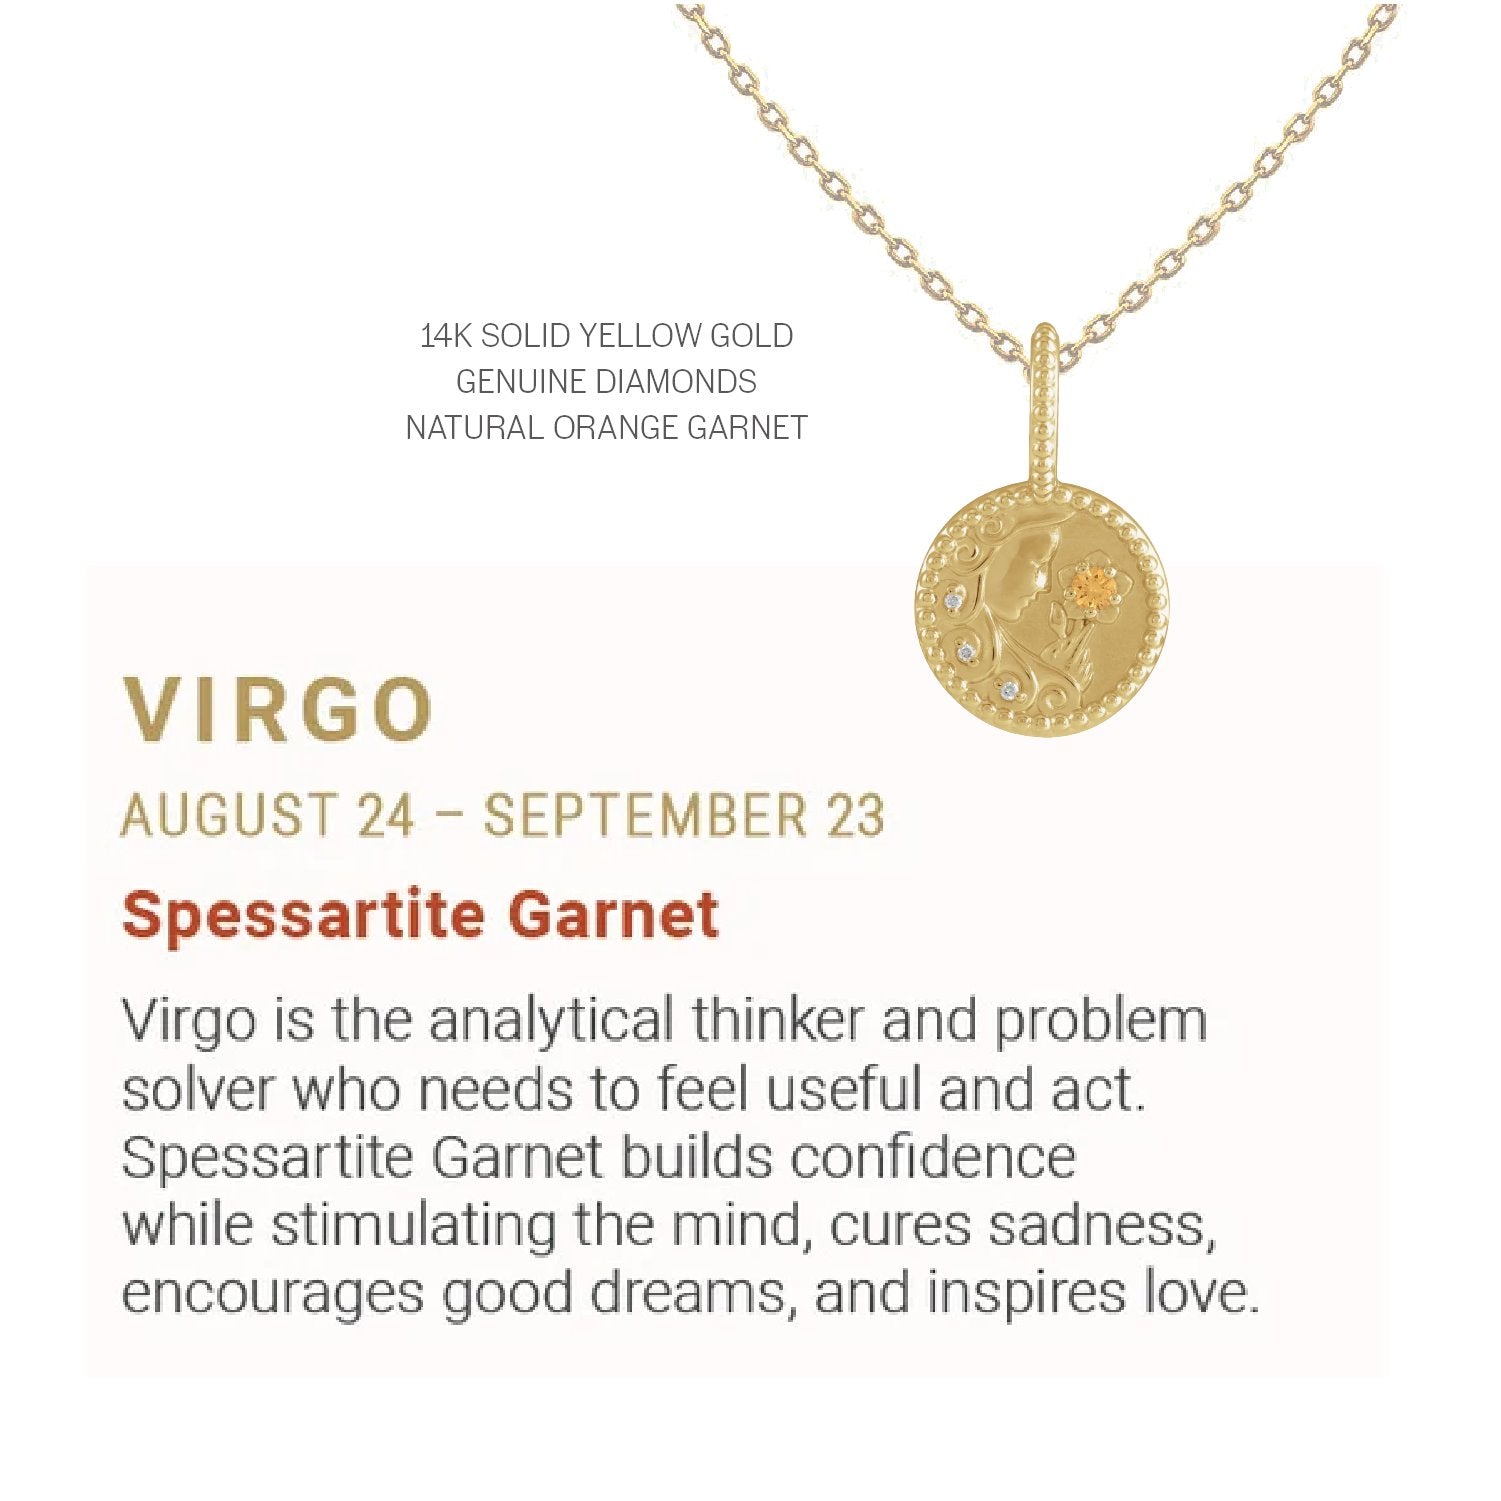 Zodiac Charm Necklace in 14K Gold with Diamonds Necklace Robyn Canady 14K Solid Gold adjustable 16"-18" Virgo